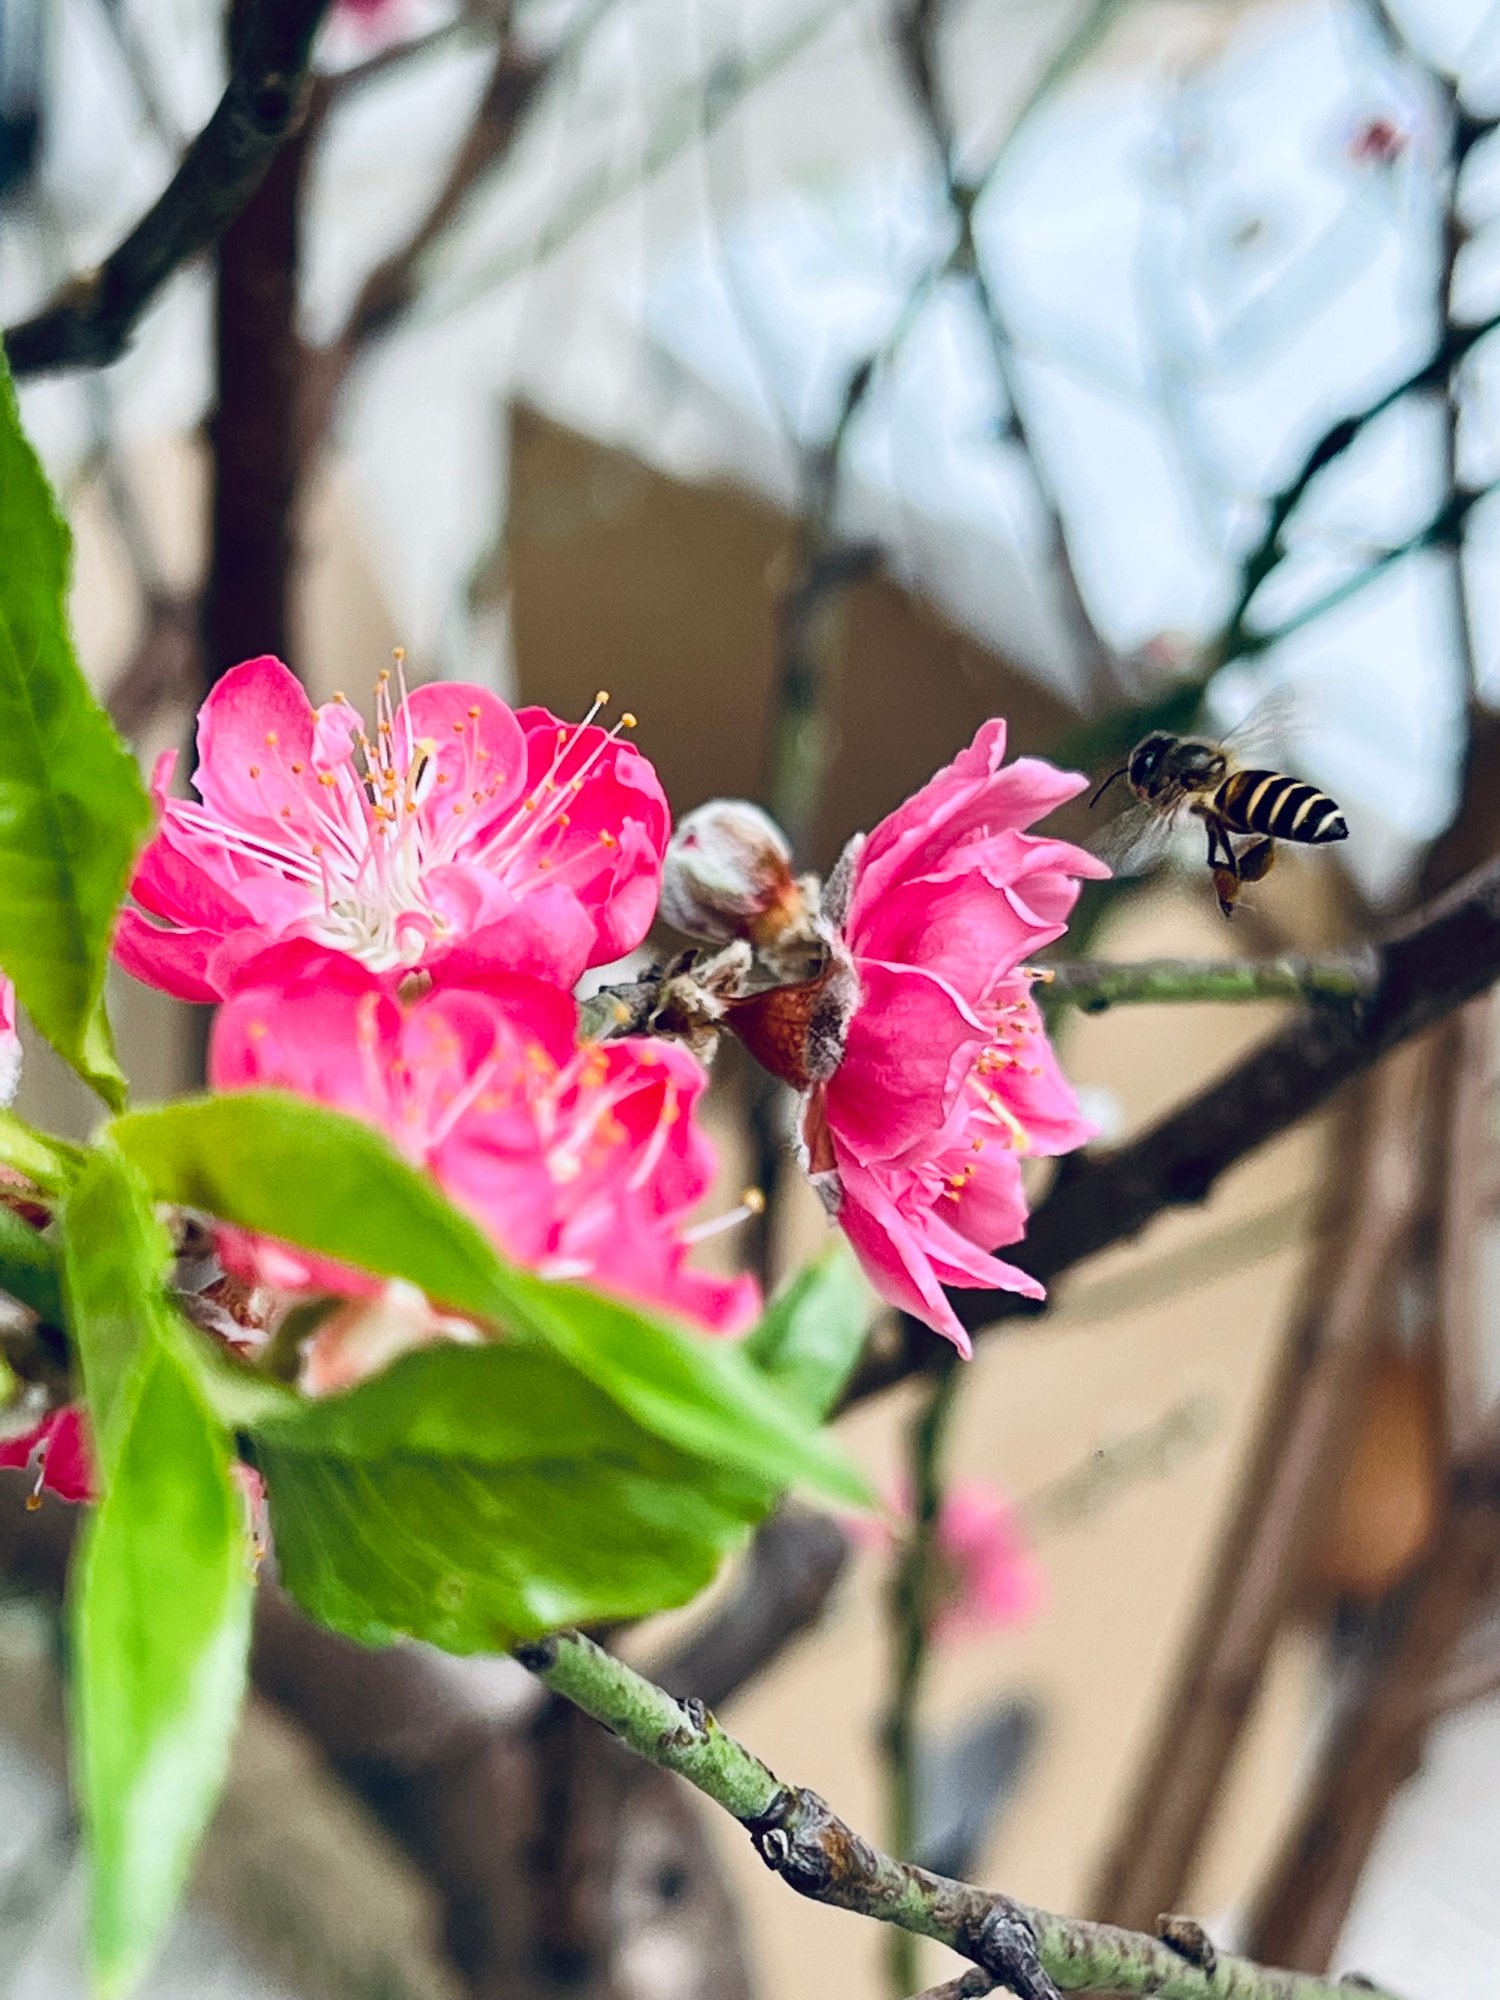 A bee flying next to a cherry blossom